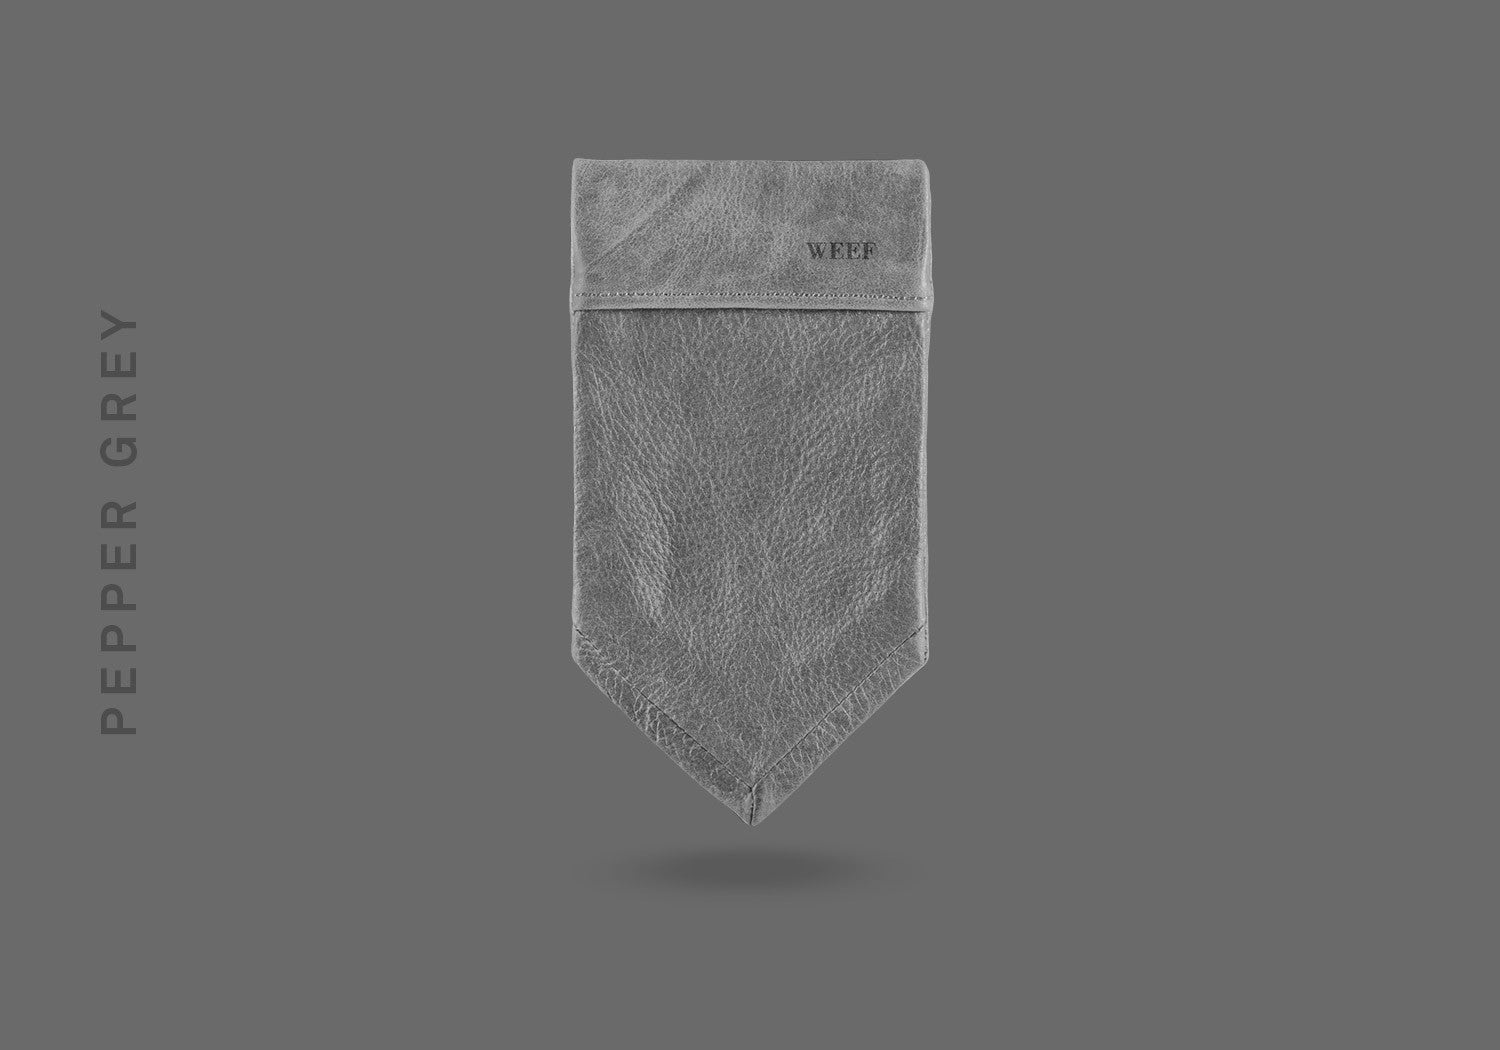 This pepper grey WEEF handmade leather pocket square is a great present or gift idea for dapper and stylish gentlemen for fathers day, valentines day or Christmas.